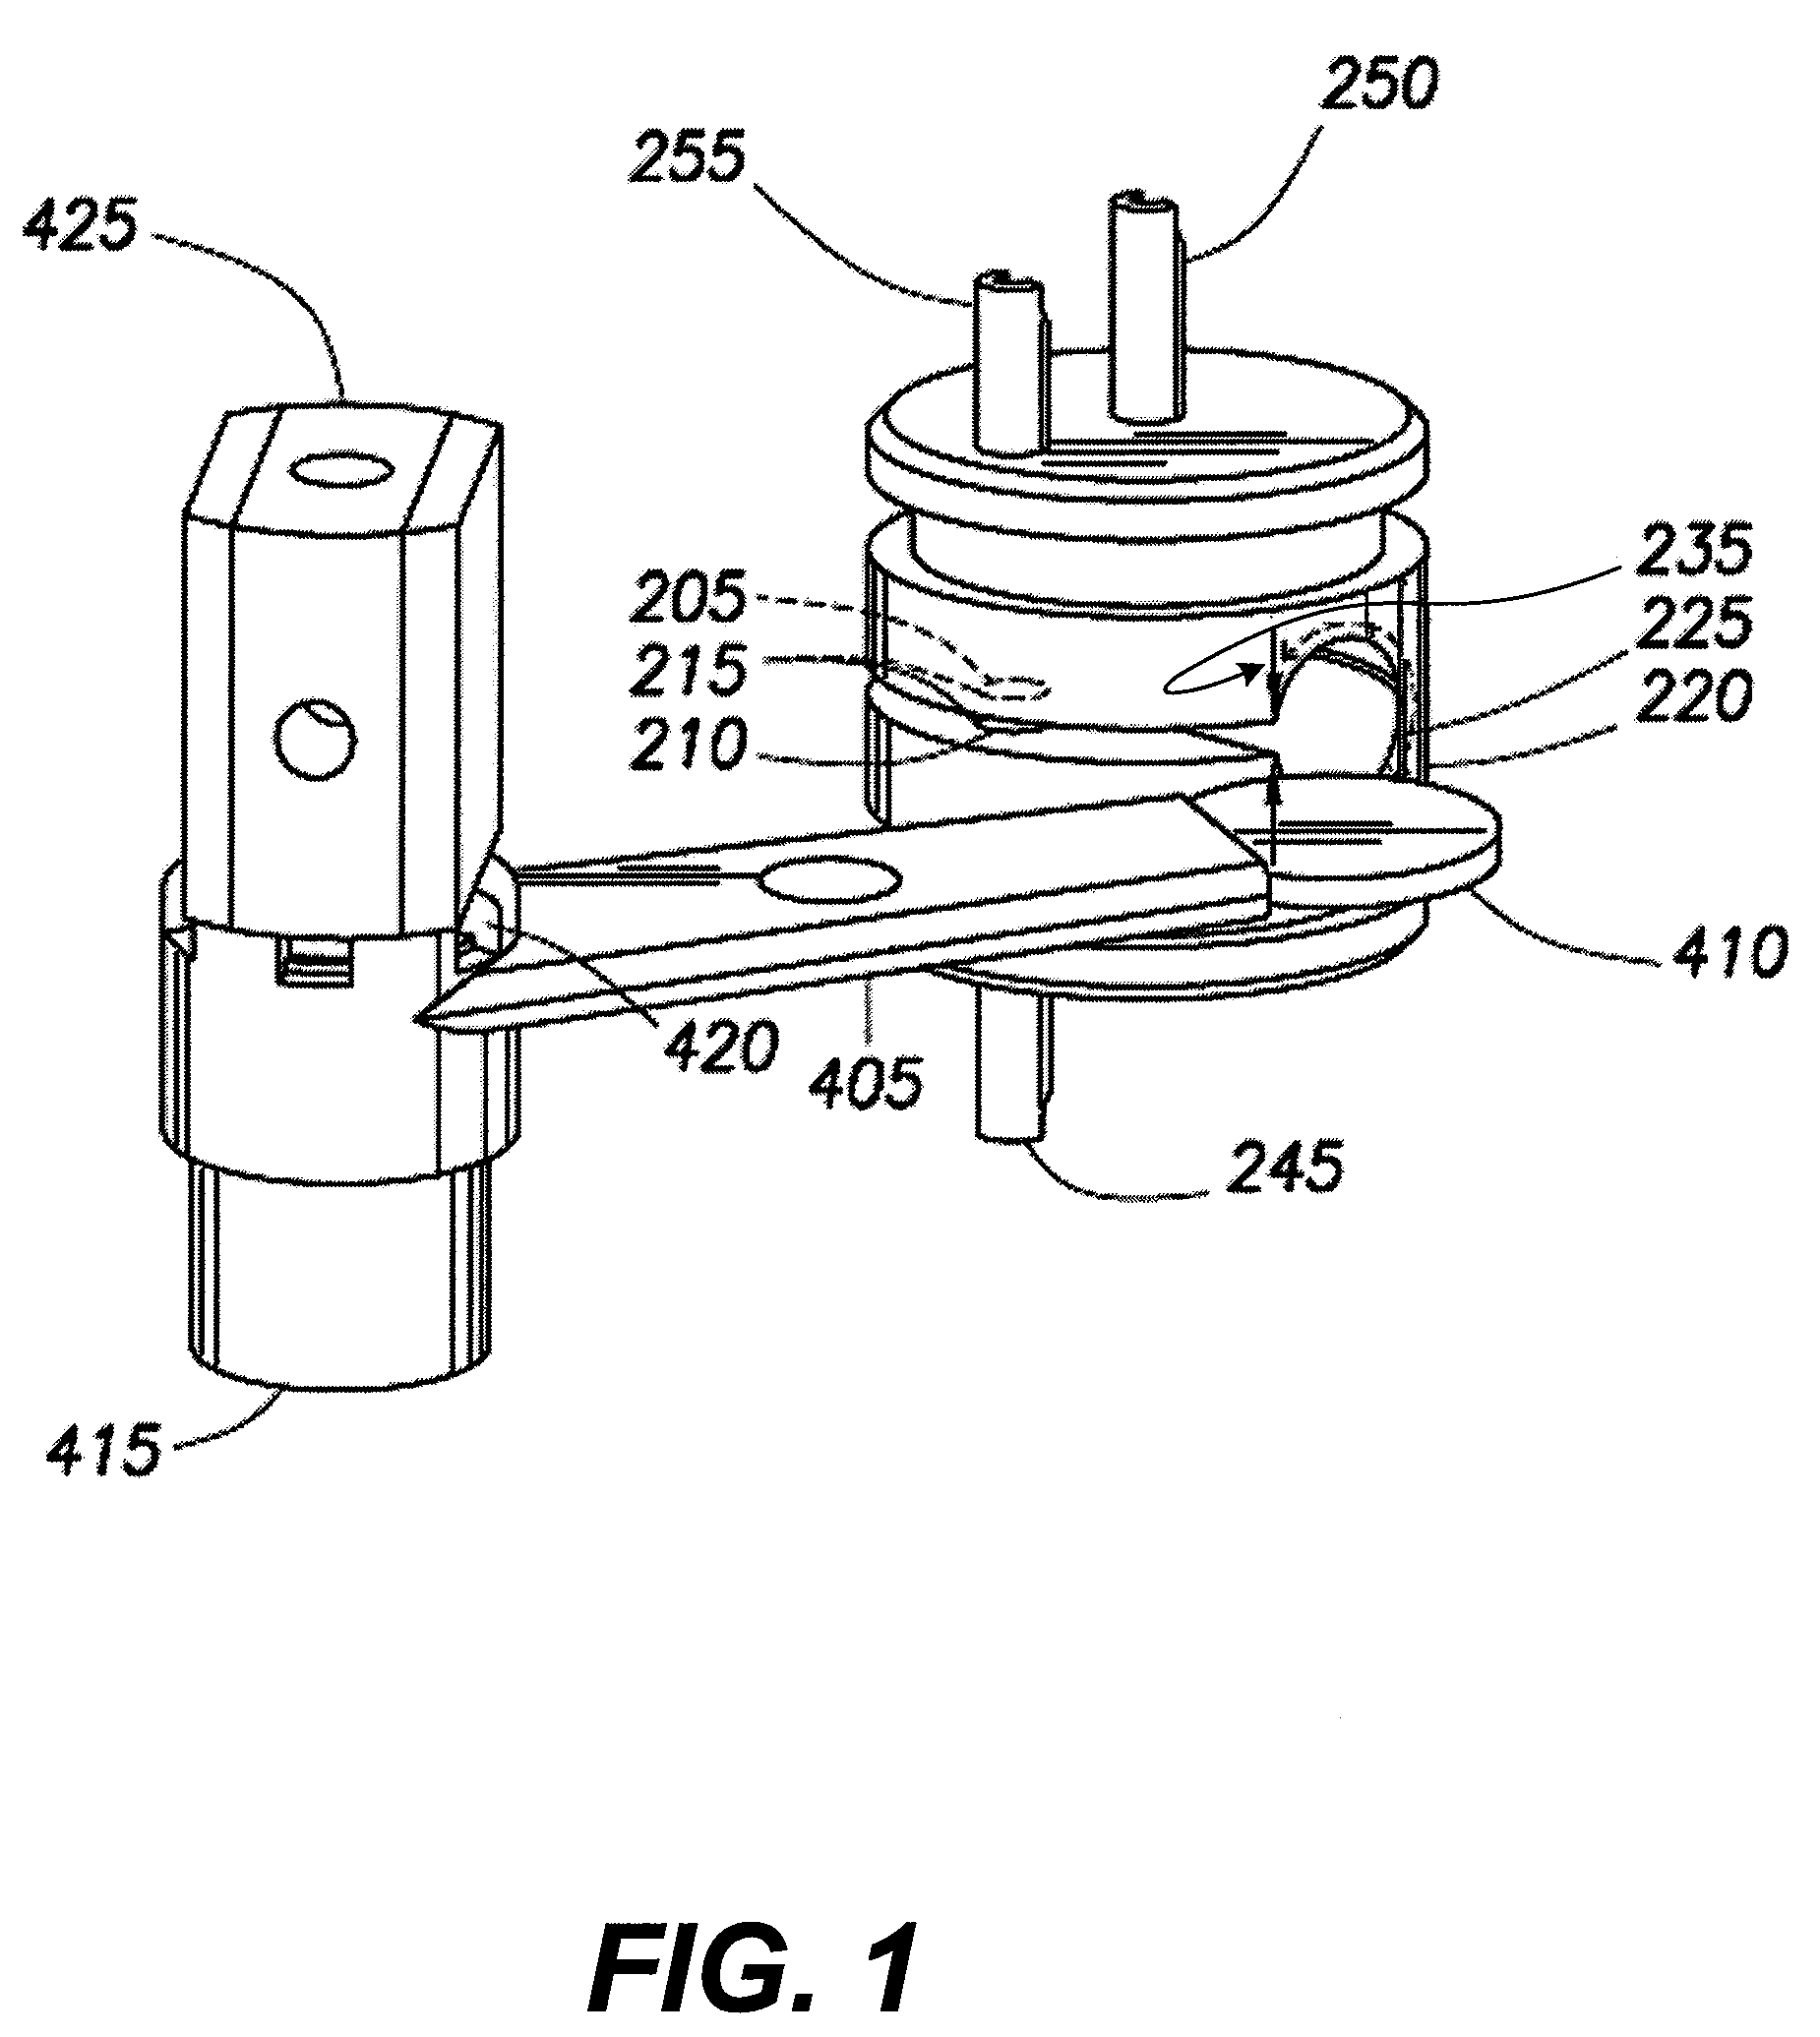 Methods for Measurement of Fluid Electrical Stability